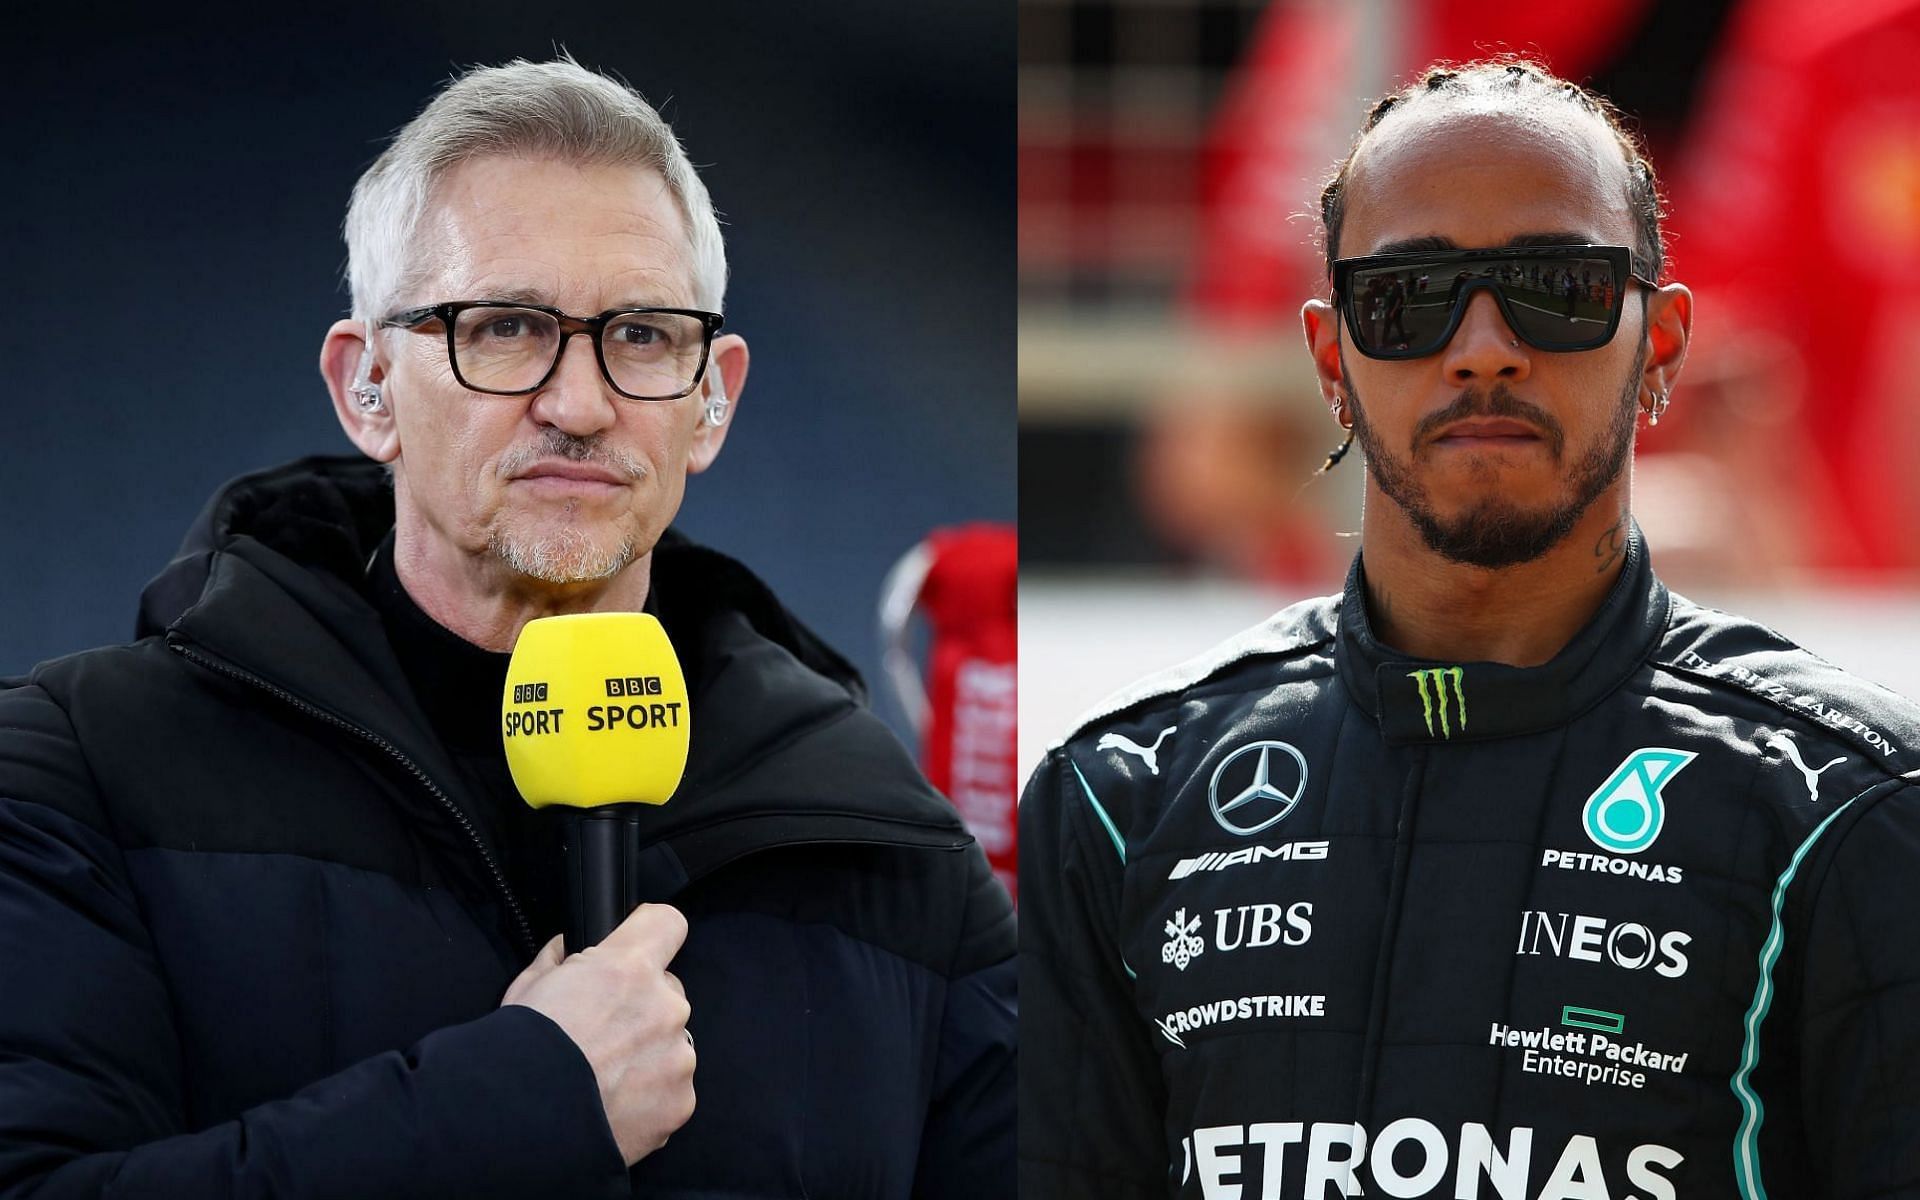 Gary Lineker (left) feels Lewis Hamilton (right) deserves all the accolades because he&rsquo;s one of the greatest sportsmen Britain has ever produced.